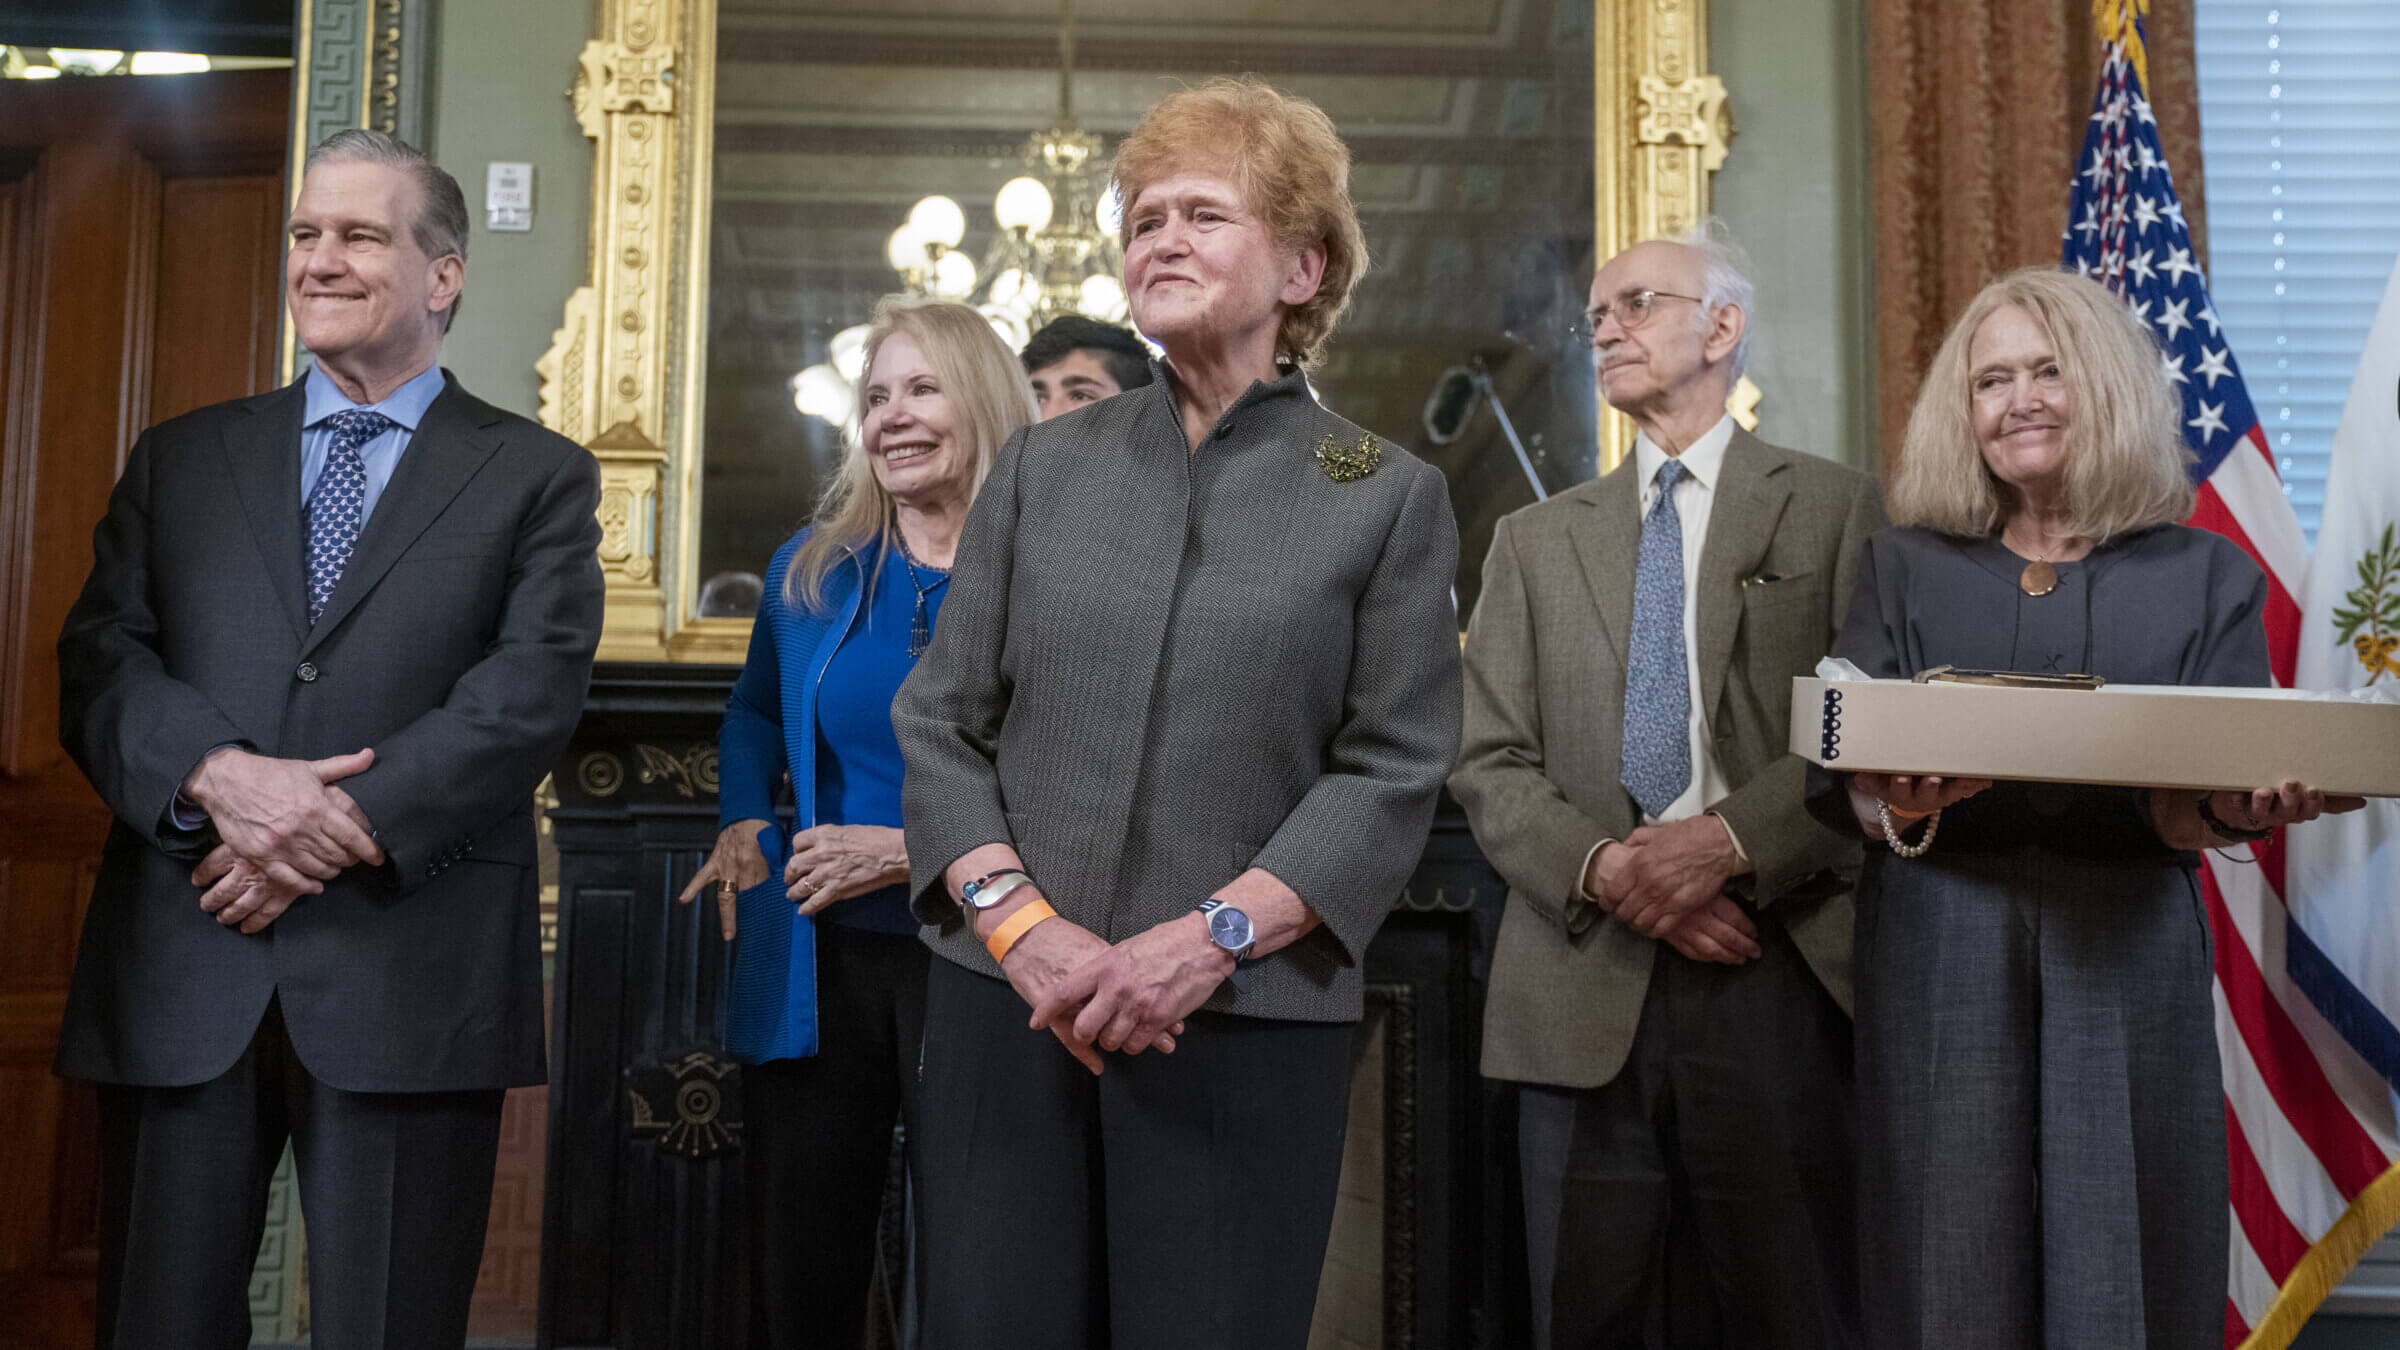 Deborah Lipstadt, special envoy to monitor and combat anti-Semitism, center, after being sworn-in at the Vice President's Ceremonial Office in Washington, D.C., U.S., on Tuesday, May 24, 2022